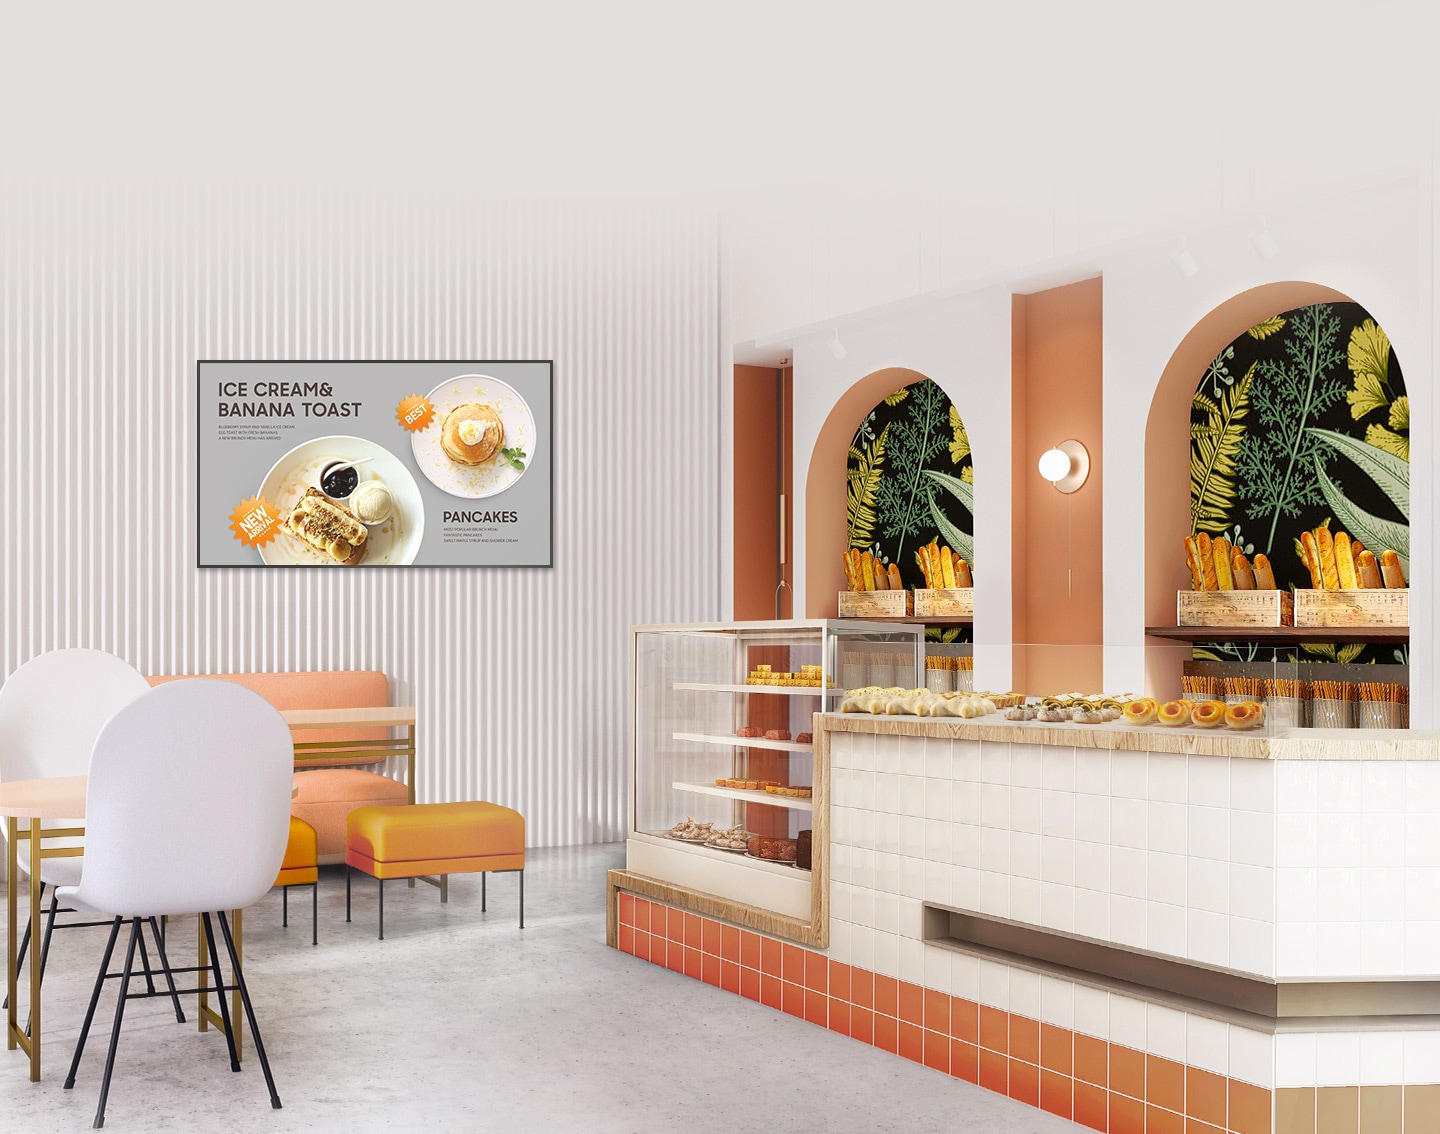 QM32C is installed on the wall of the bakery store, next to a counter with breads on a shelf.